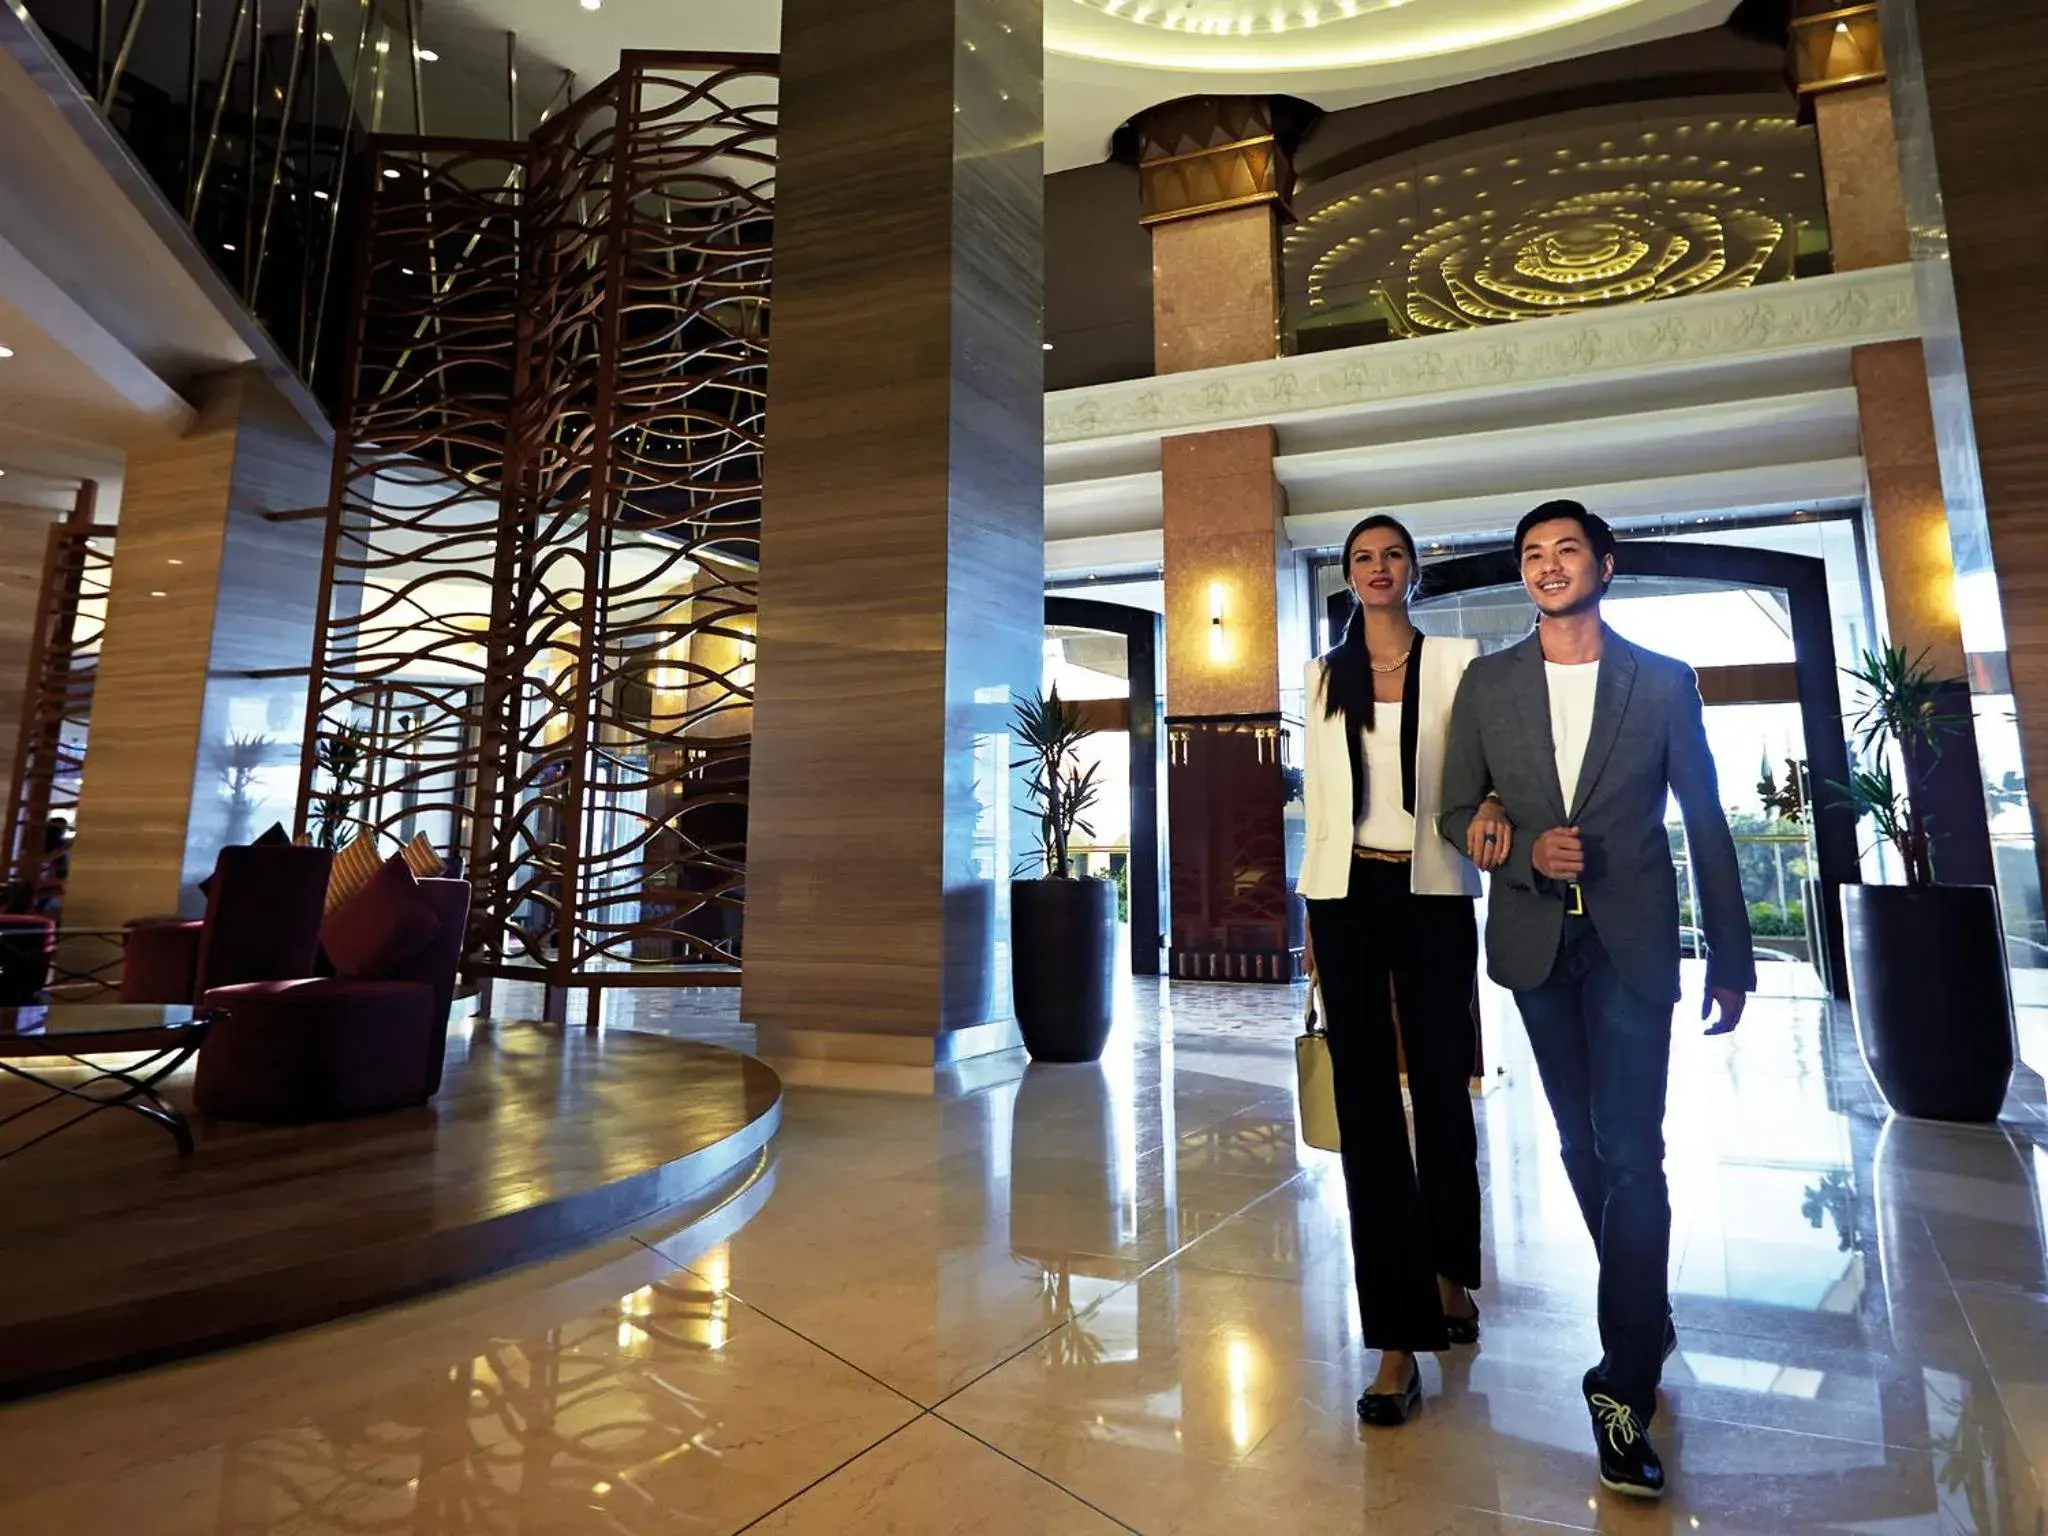 Guests, Staff in Resorts World Genting - Genting Grand